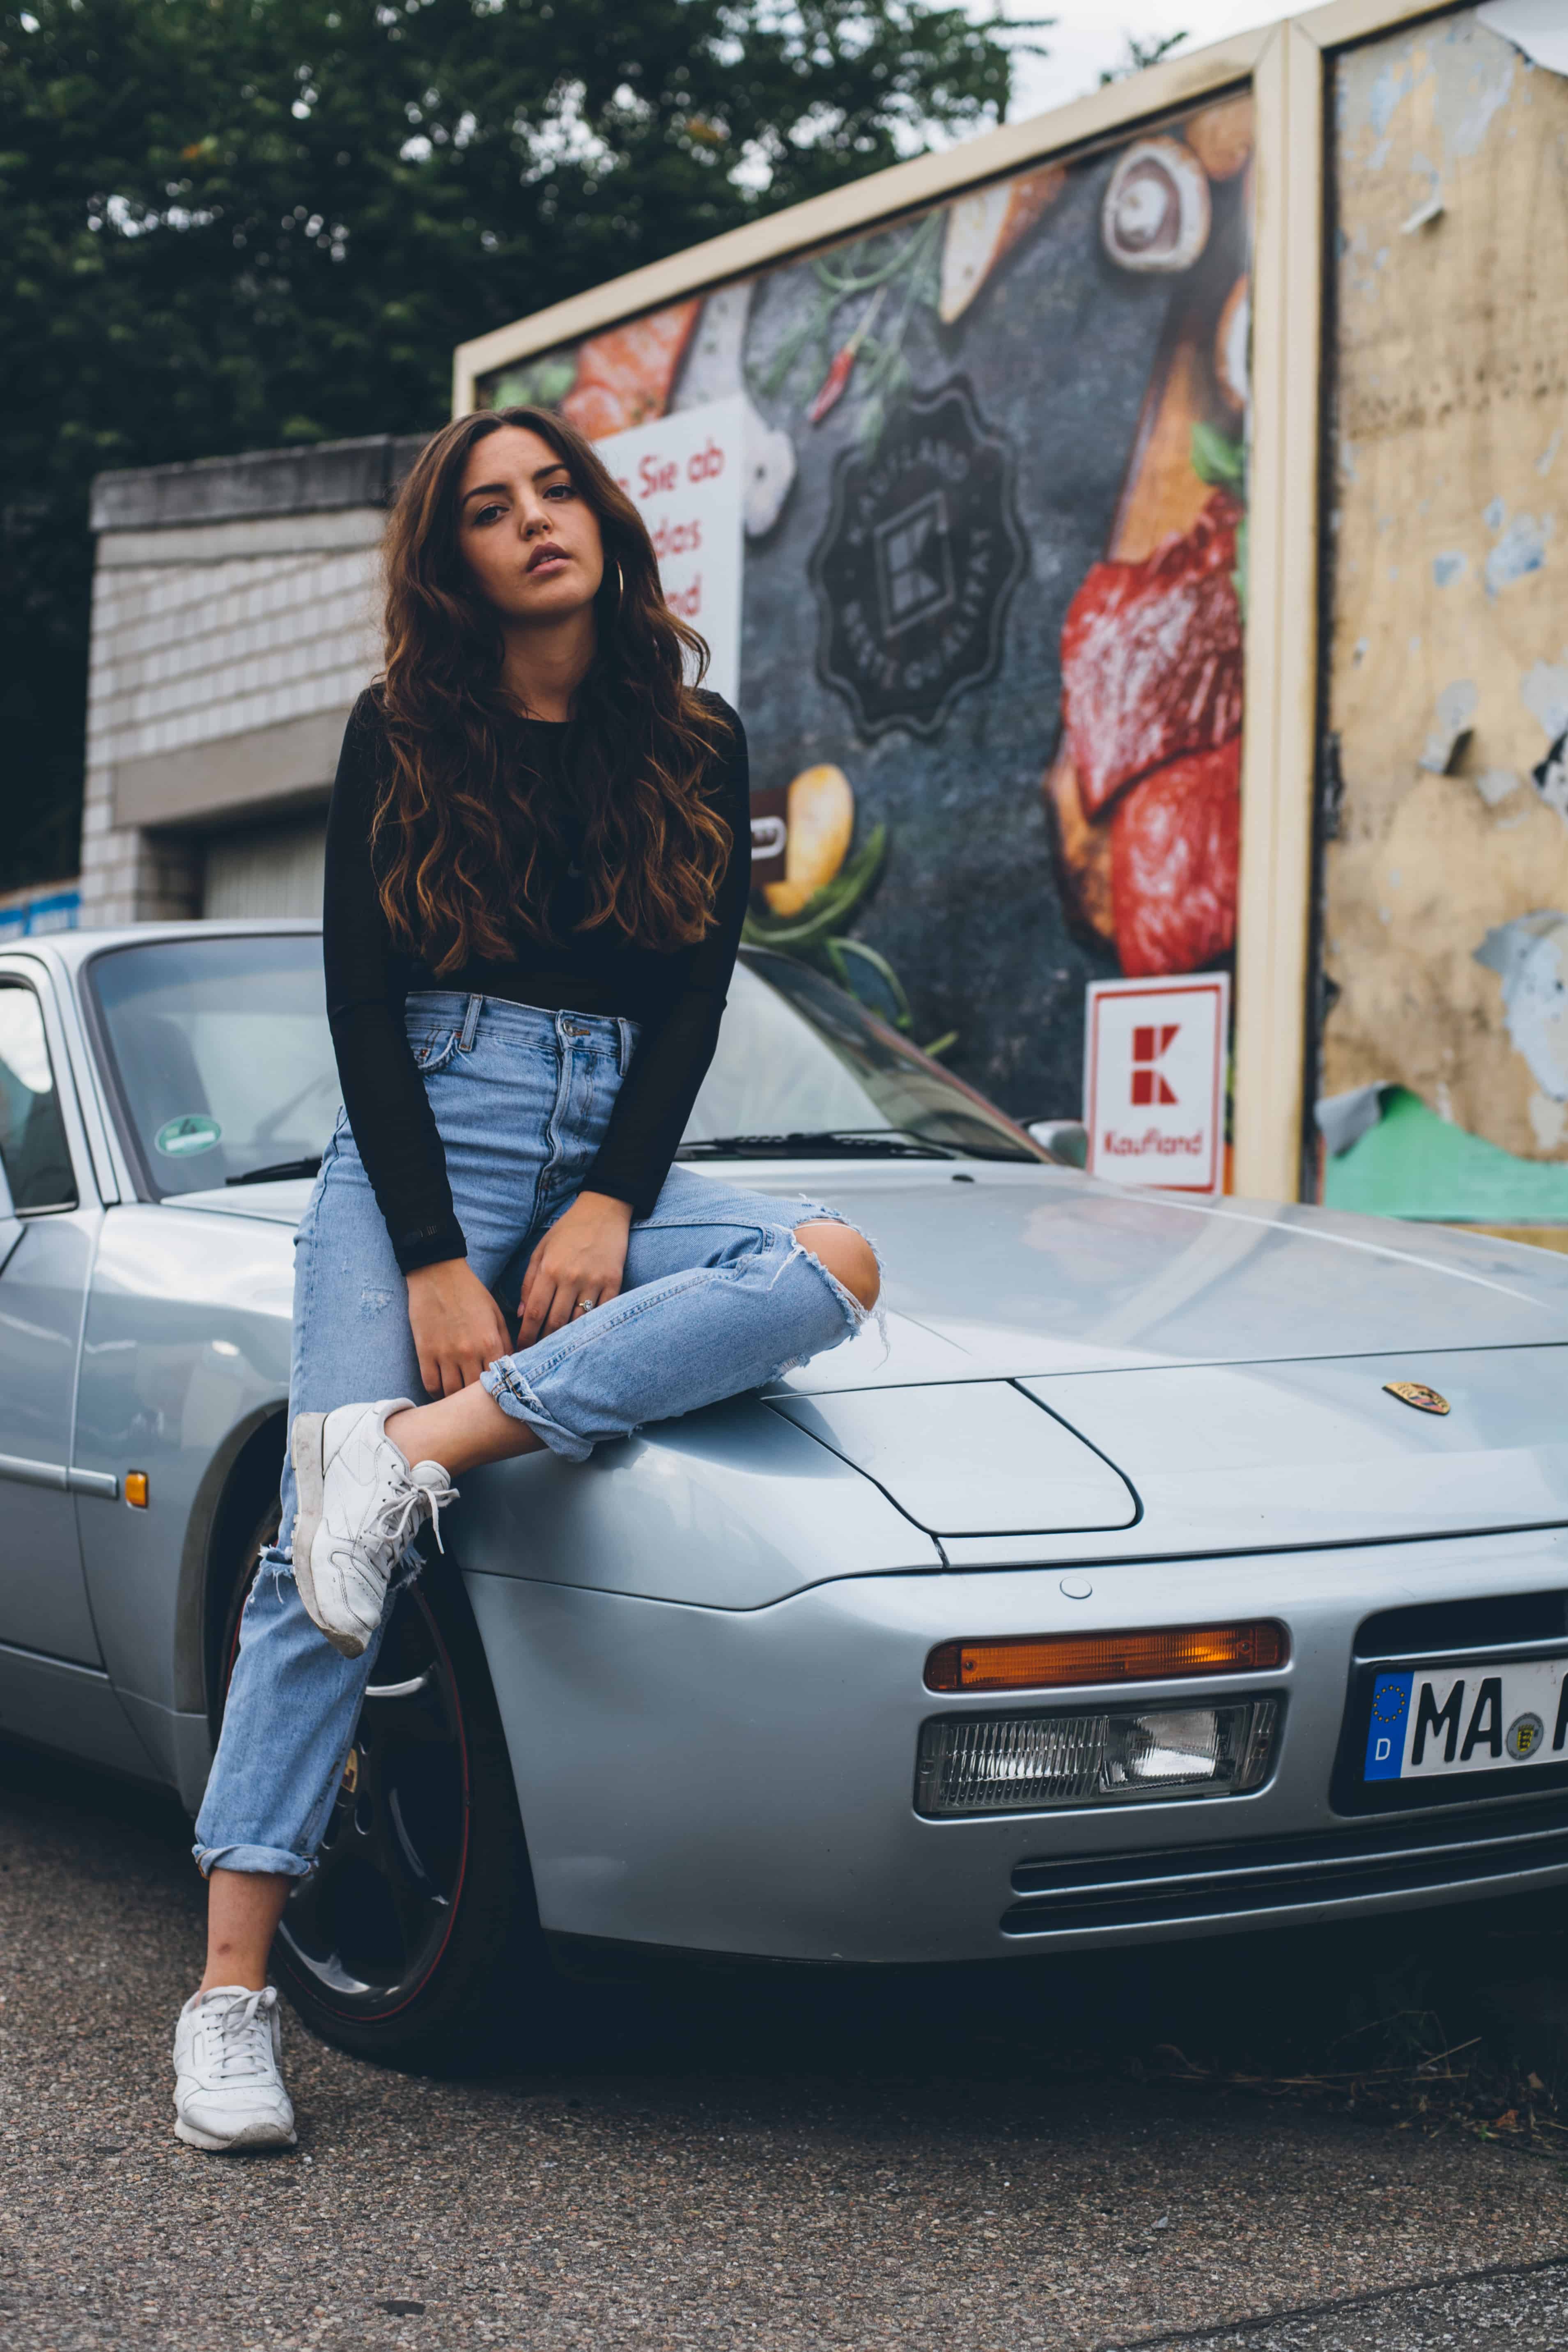 Porsche 944 with Woman Sitting on Hood